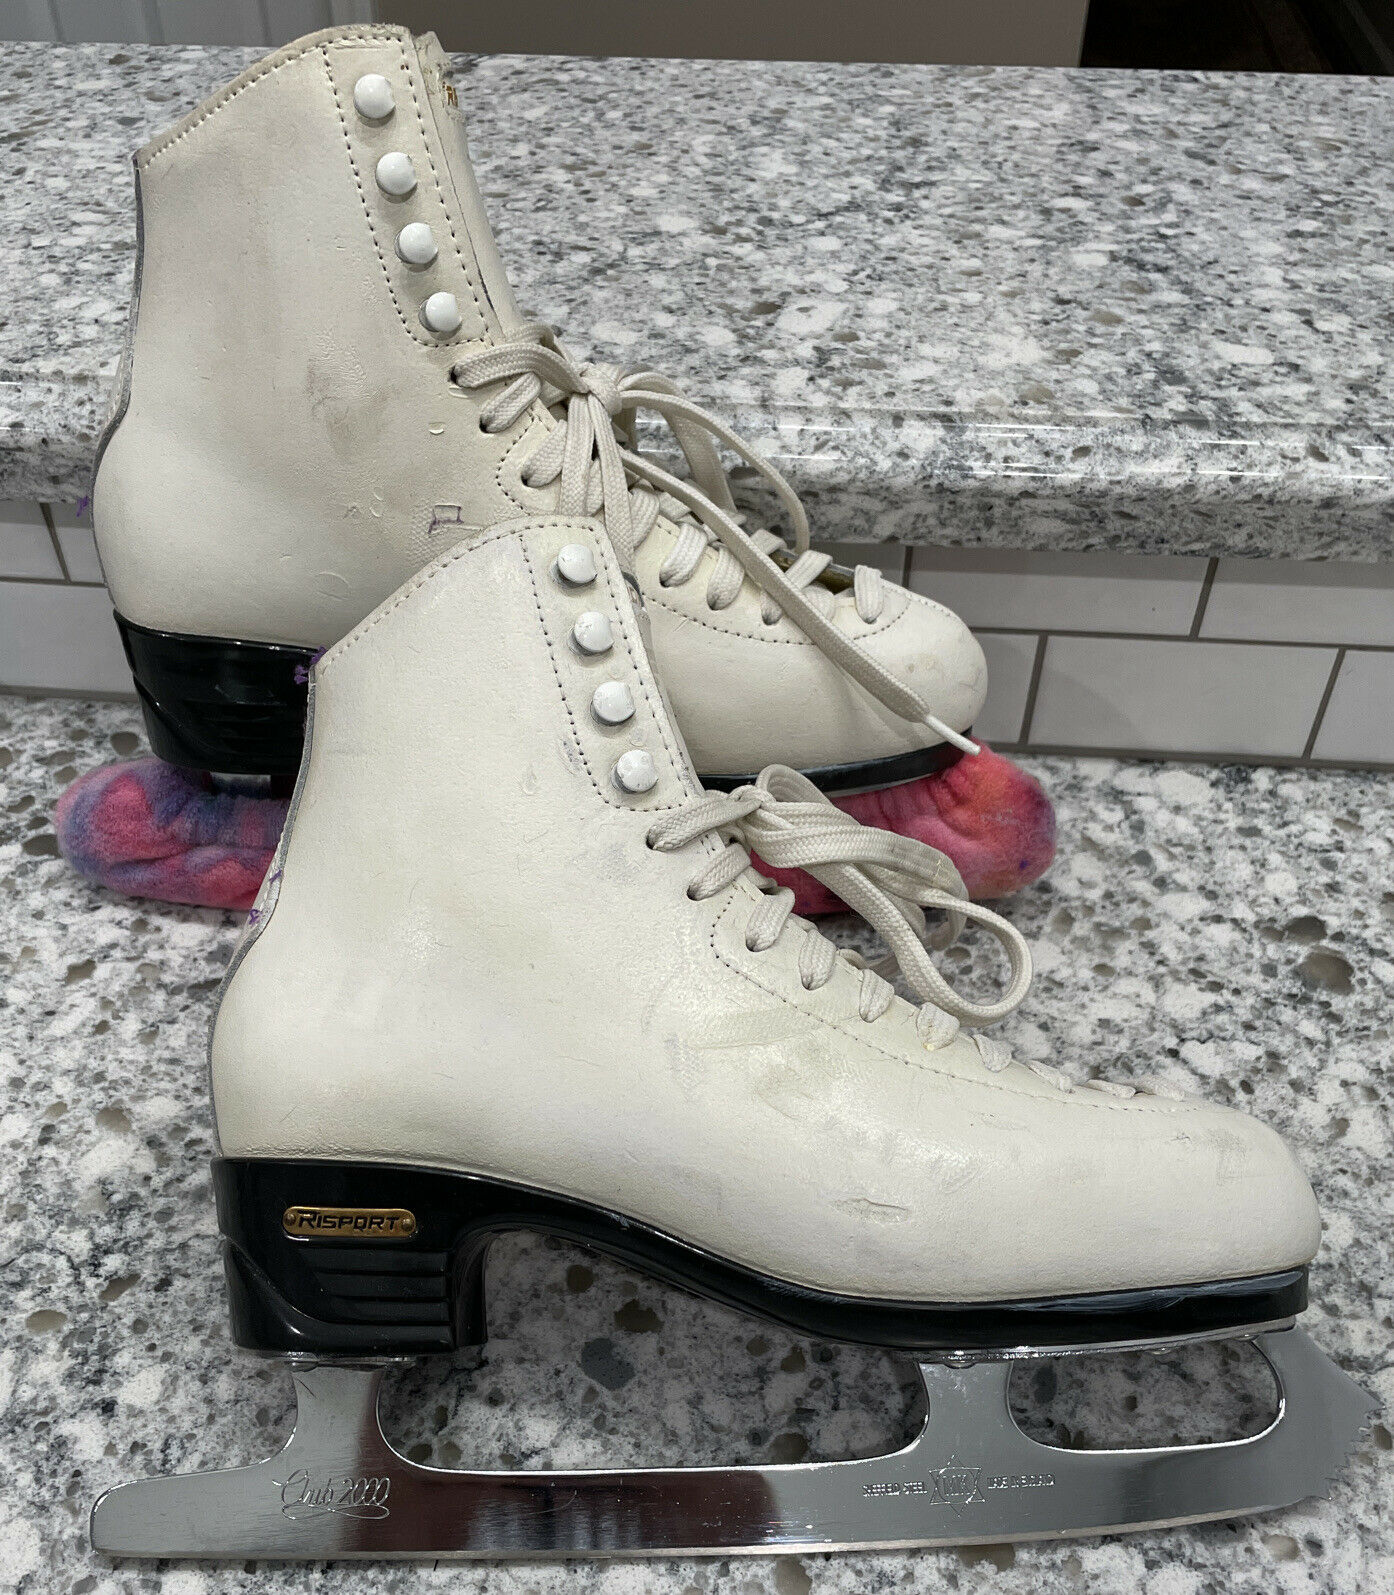 Risport Club 2000 Ice Skates Size 265 Women’s Figure Skating Made In Italy S4172